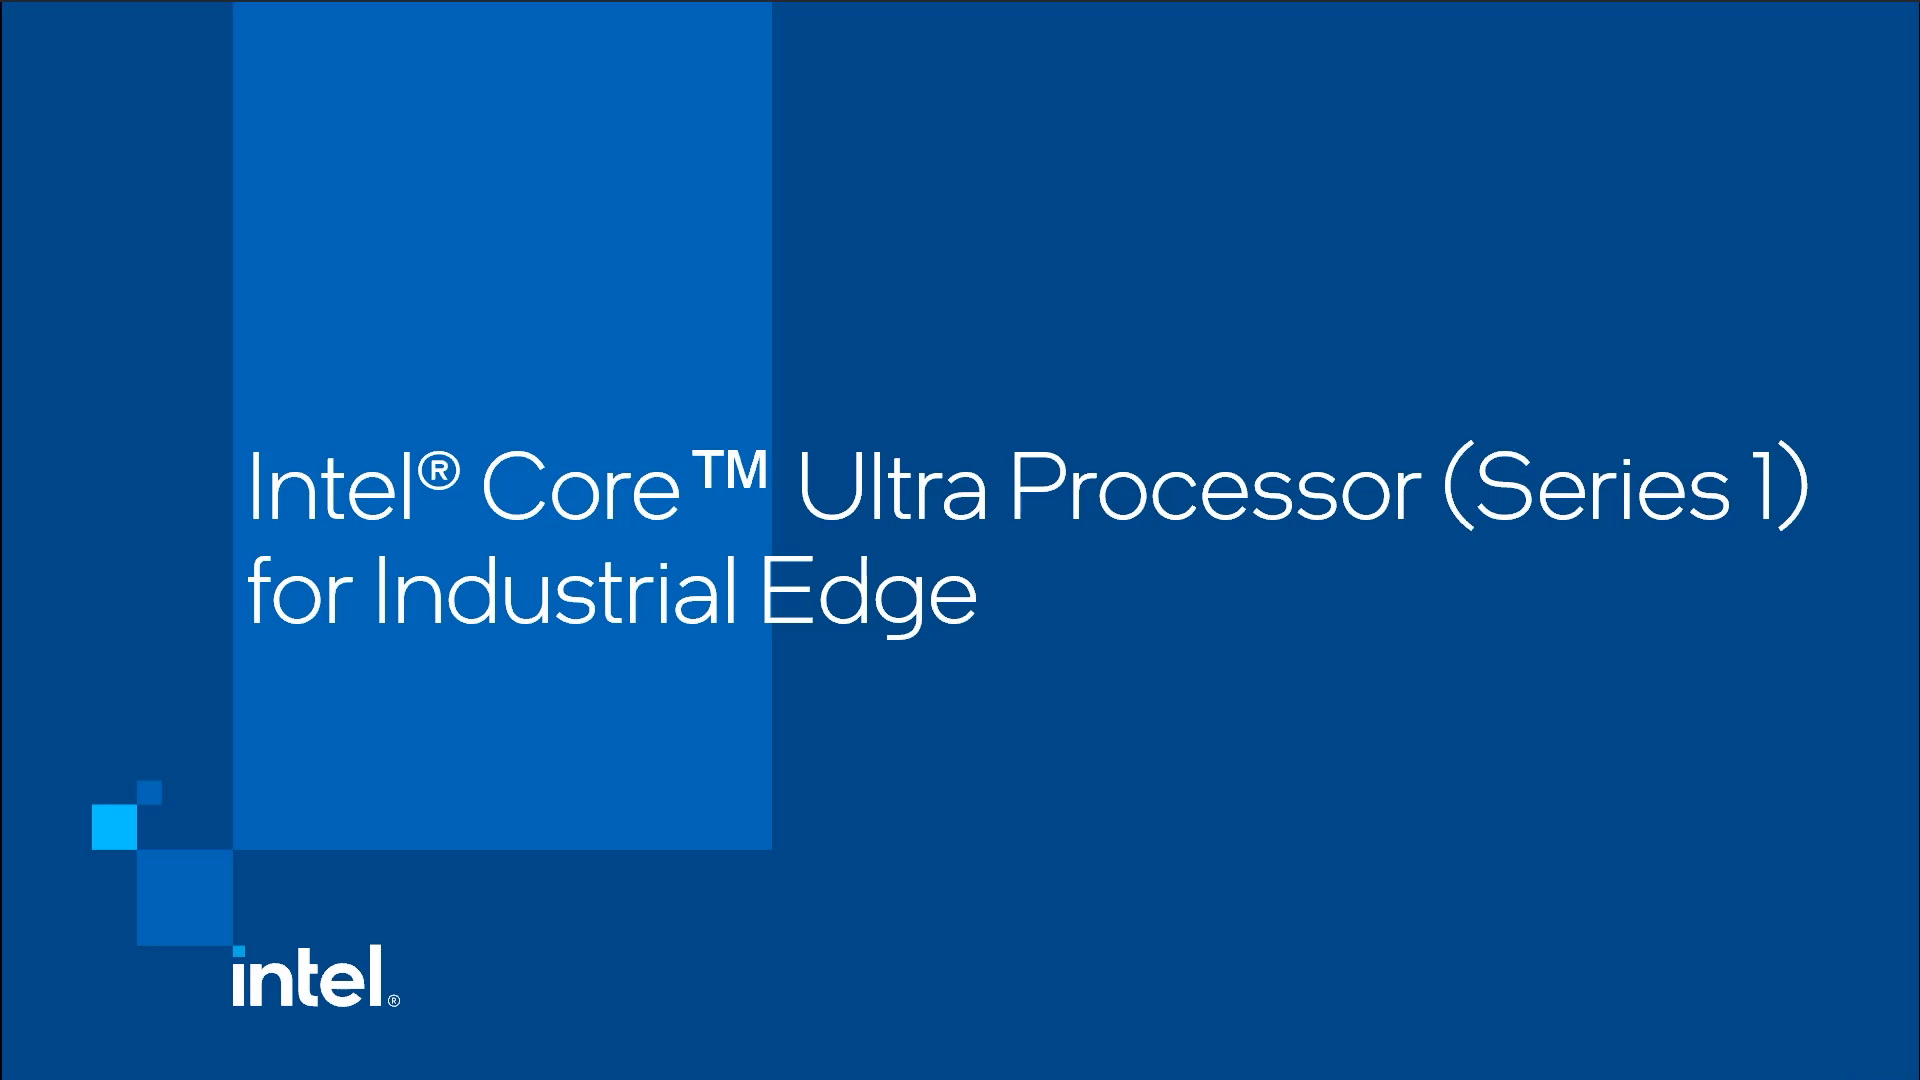 Chapter 1: Intel® Core™ Ultra Processor (Series 1) for Industrial Edge